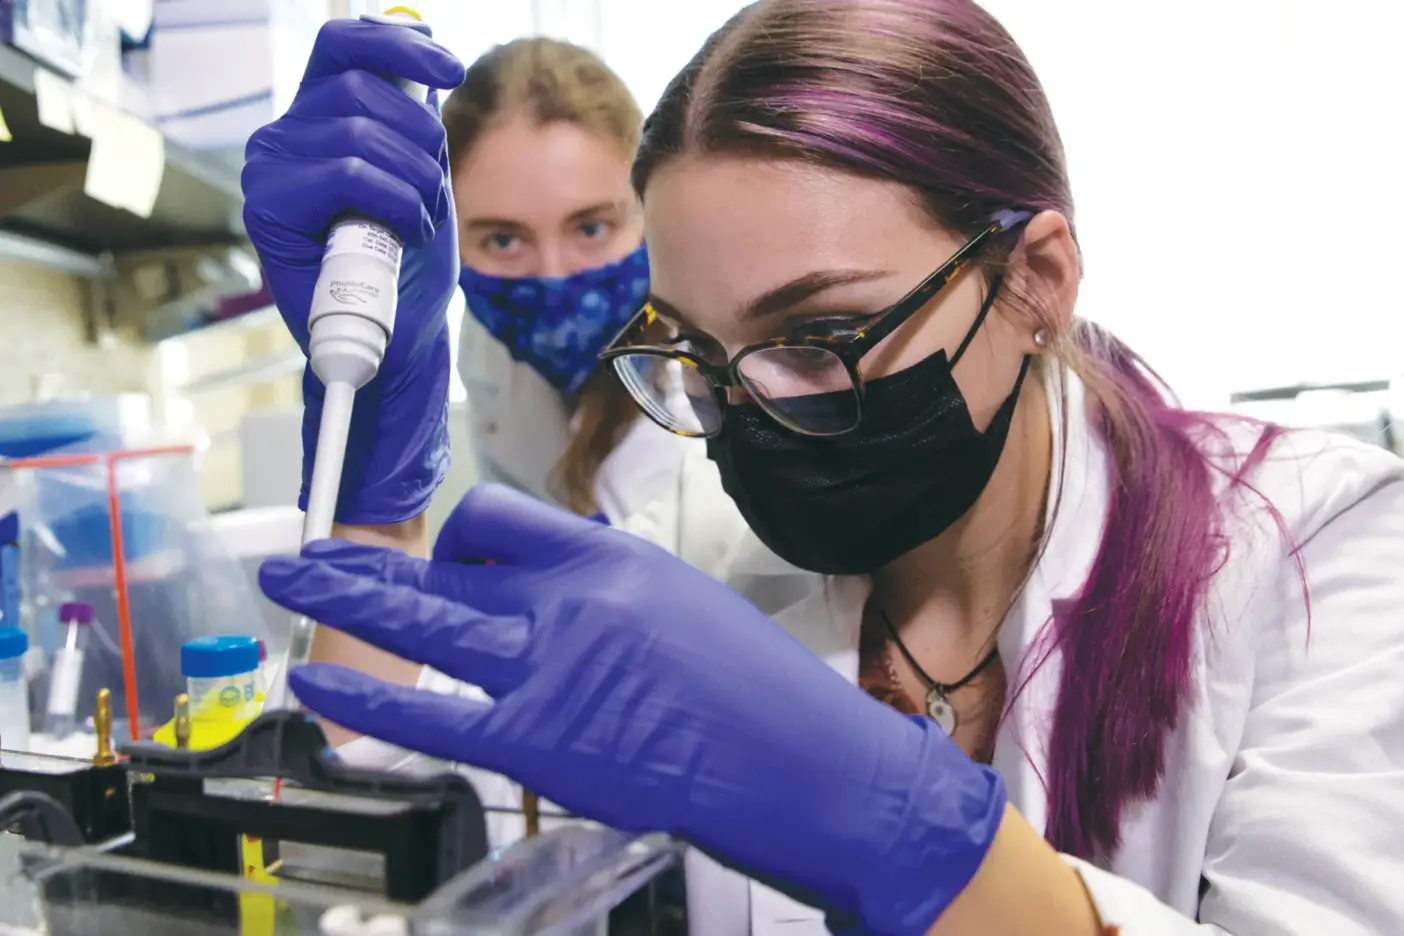 Katelin Decker loads total protein from breast cancer cells on a polyacrylamide gel for analysis while Michelle Frank observes in the background.